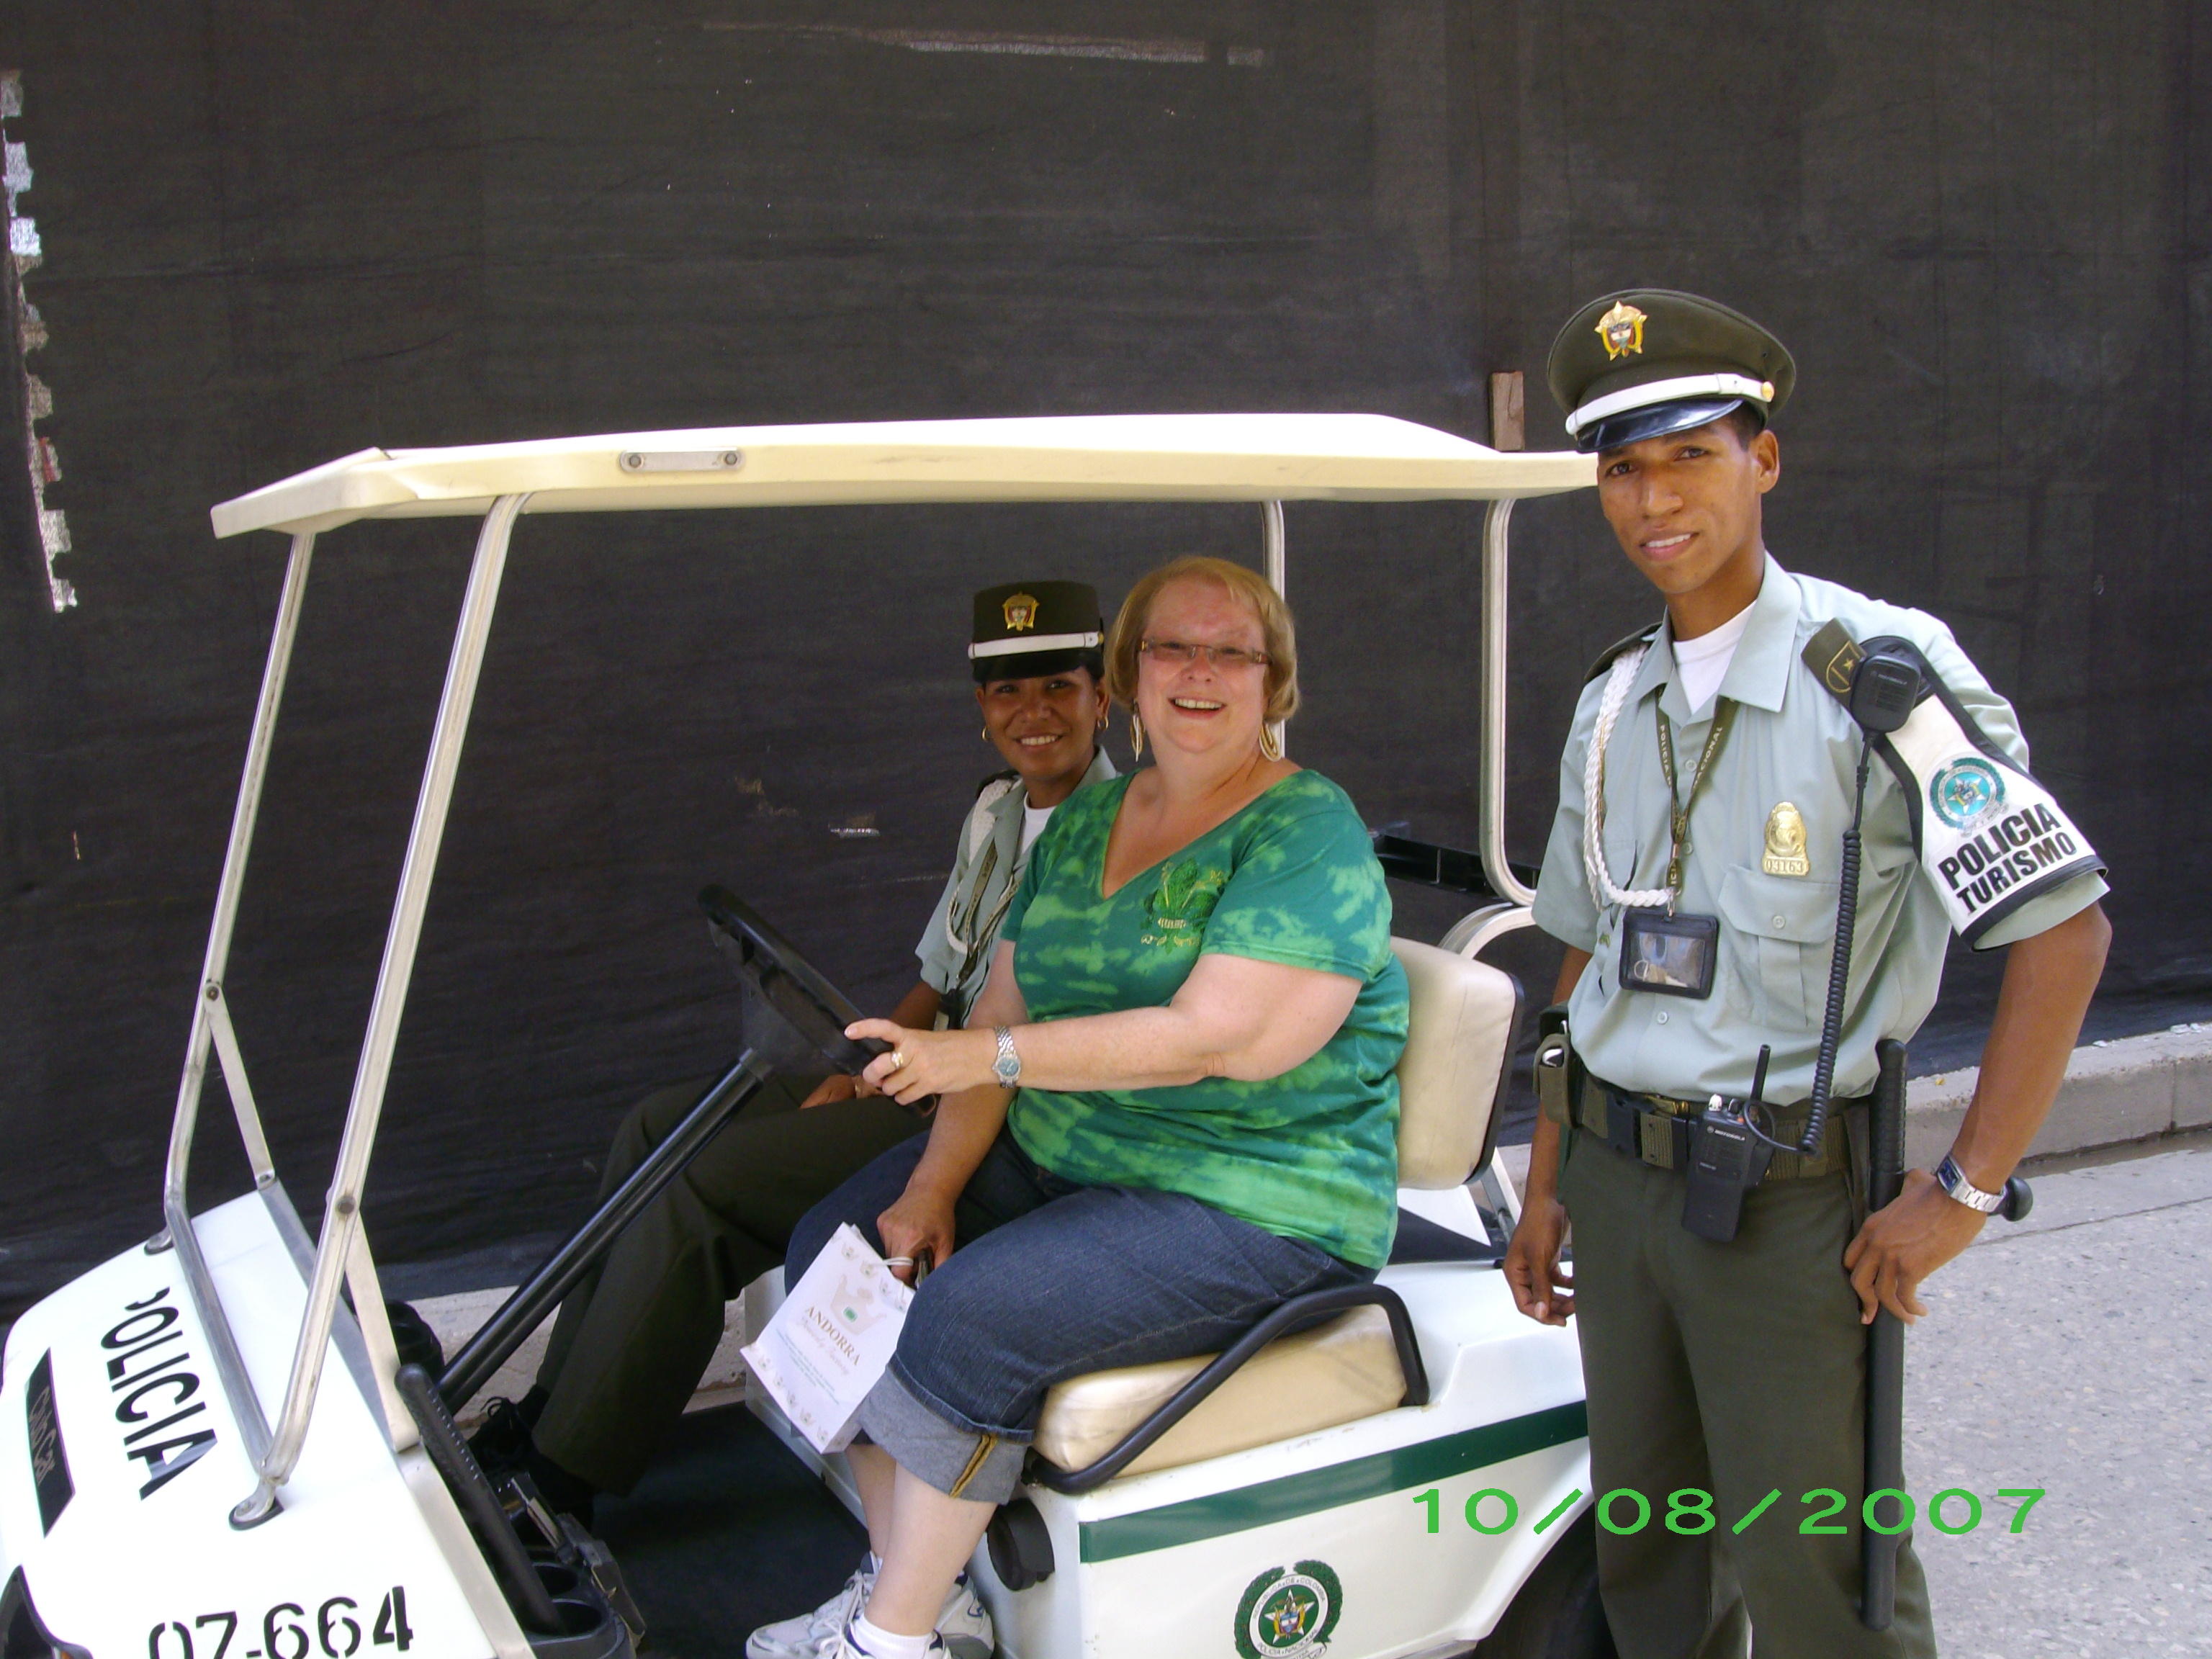 Jean chatting with the Cartagena police